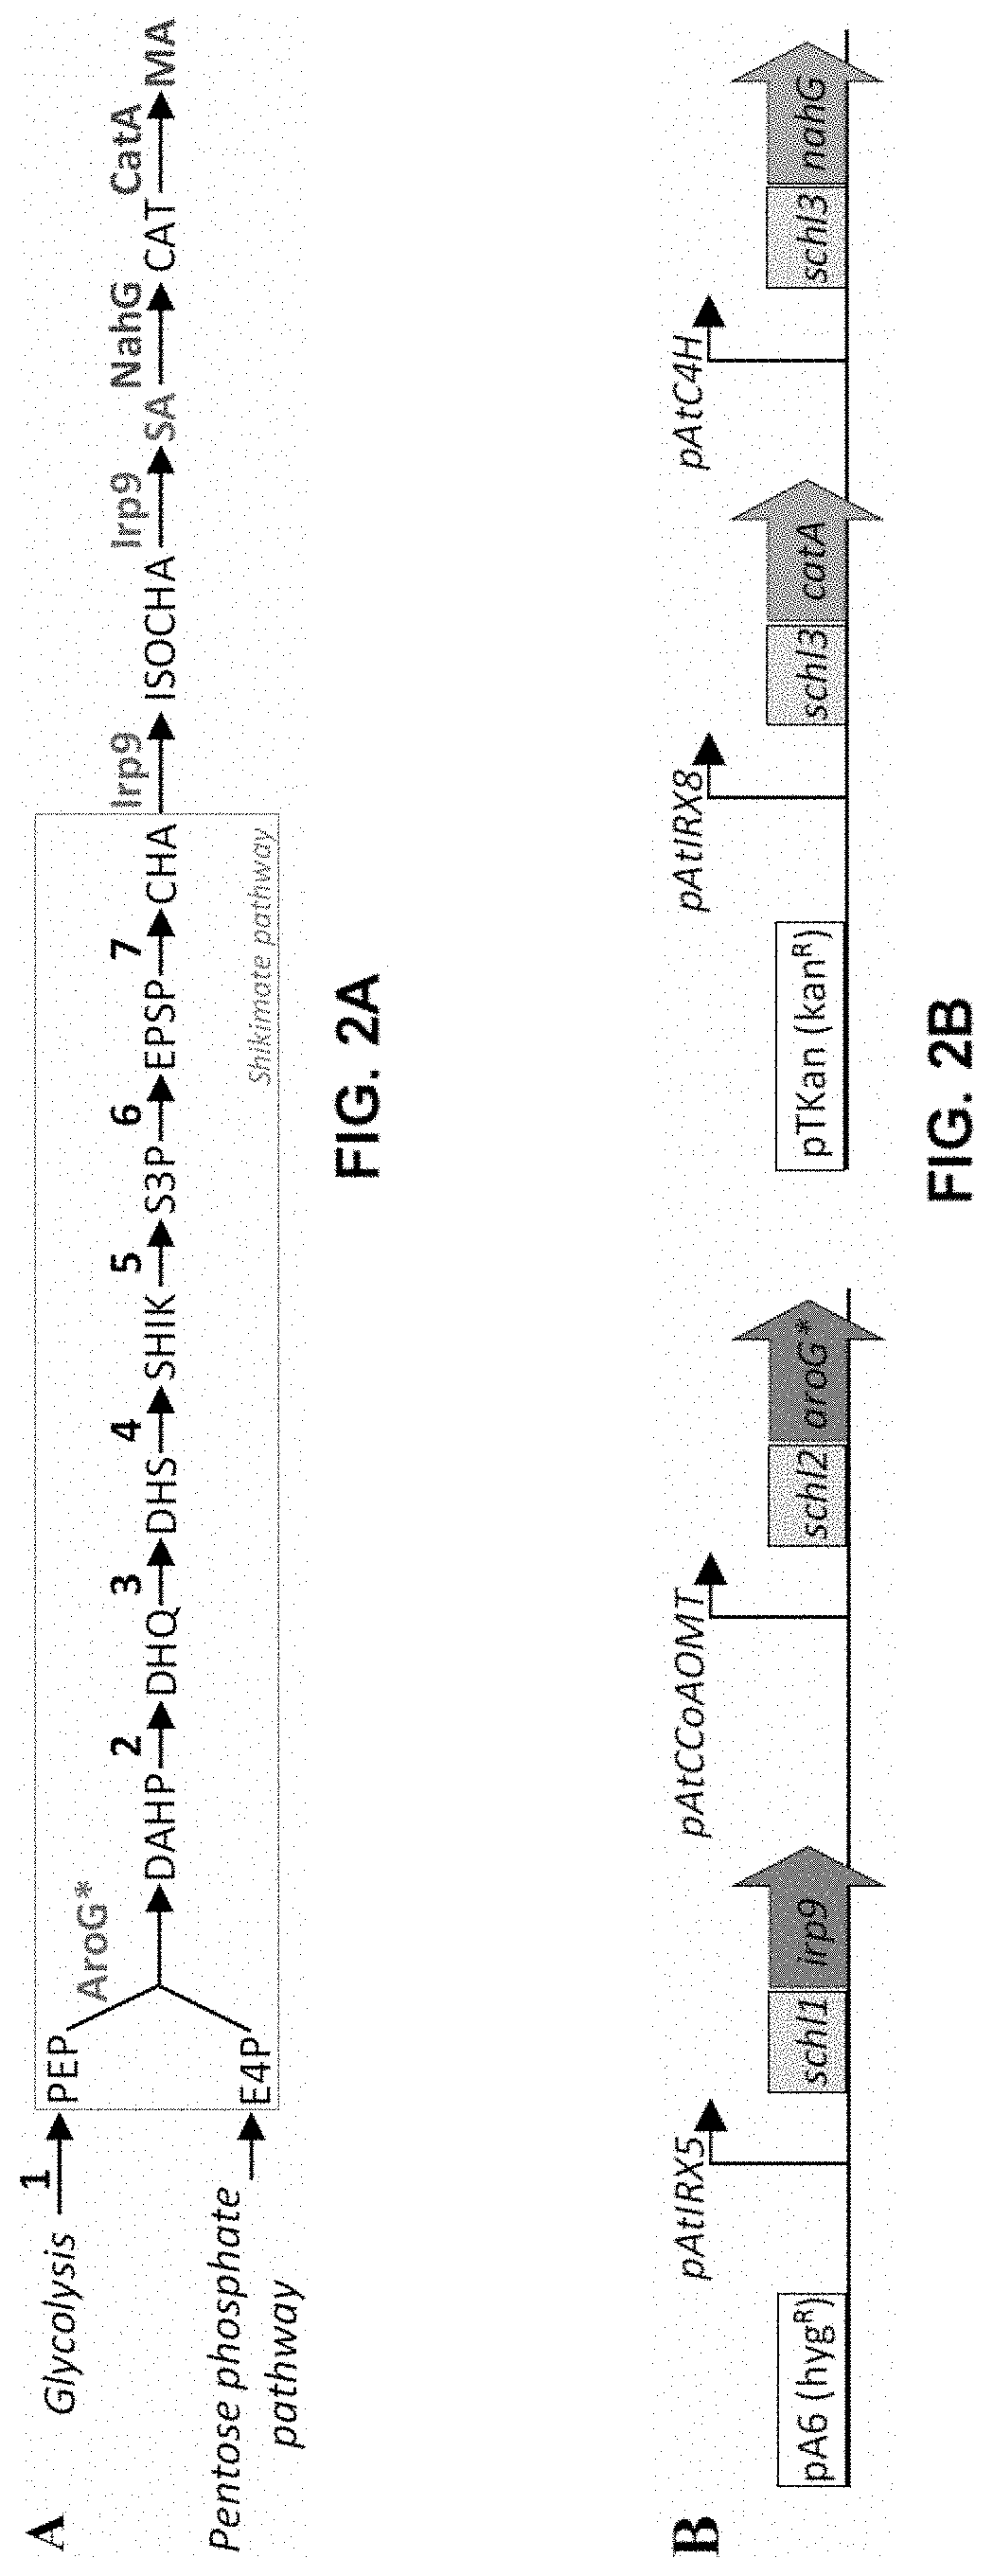 Novel plants and methods for producing muconic acid